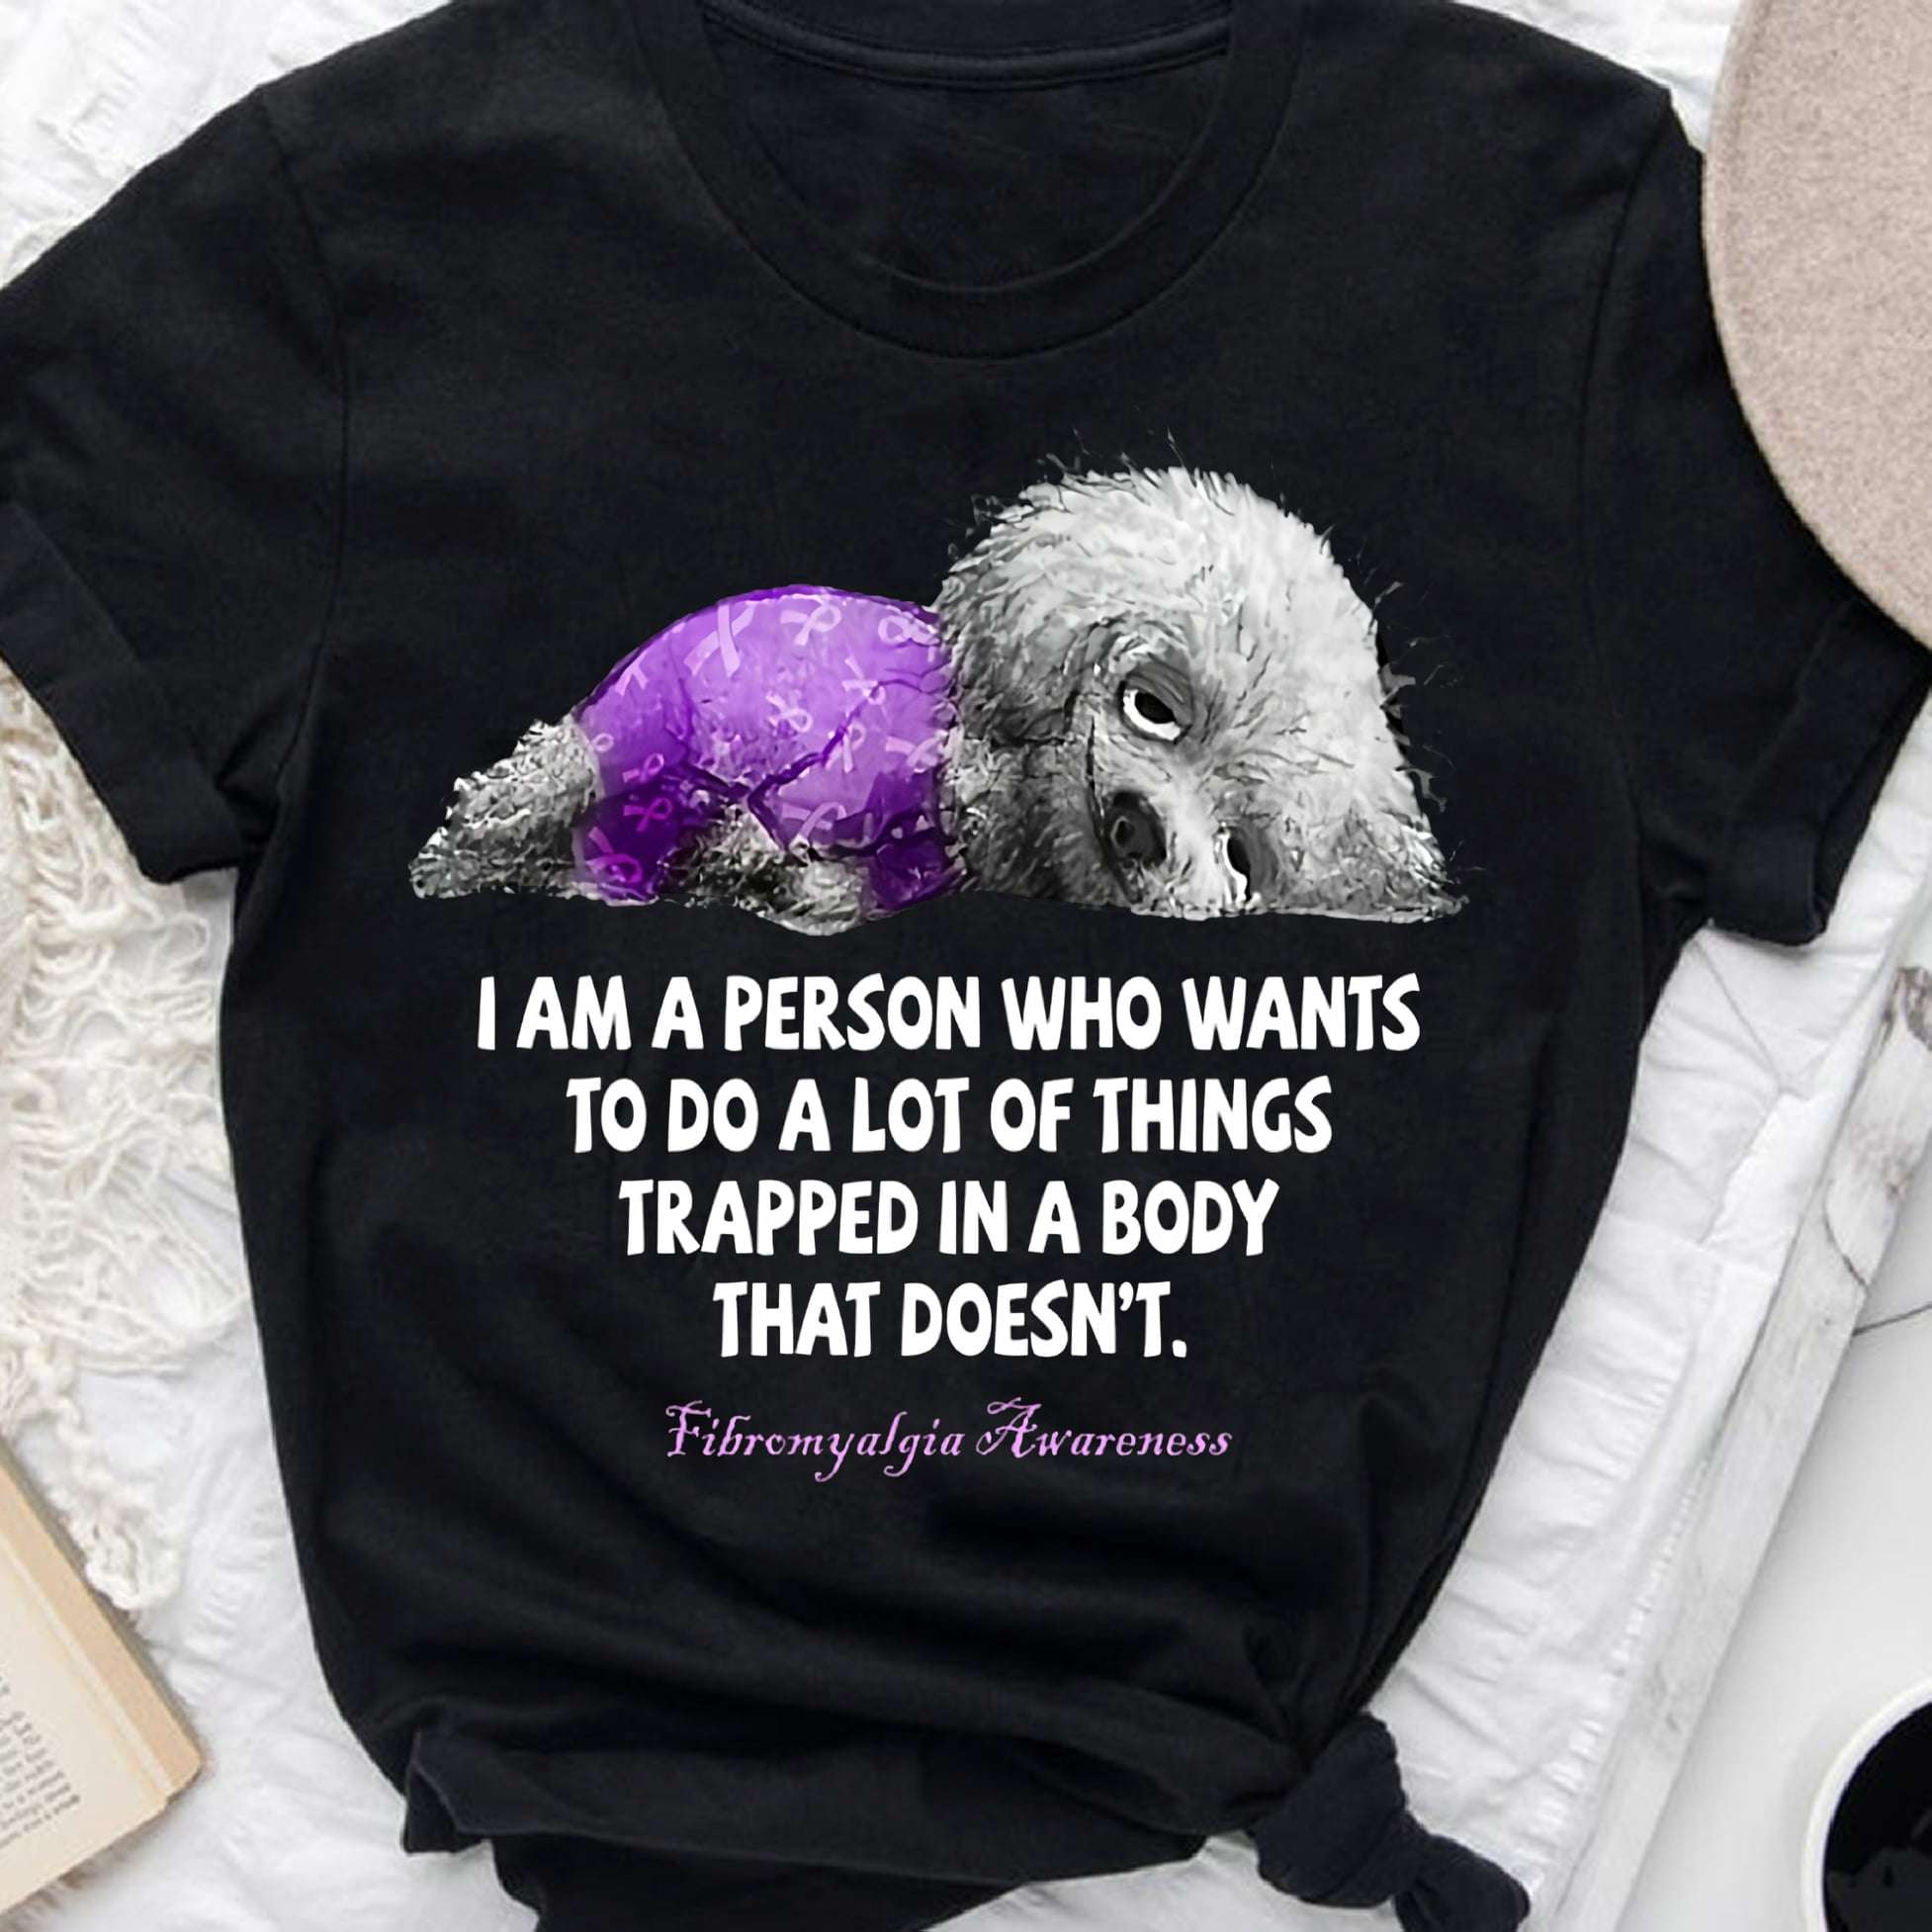 I am a person who wants to do a lot of things trapped in a body that doesn't - Fibromyalgia awareness, pain tired dog